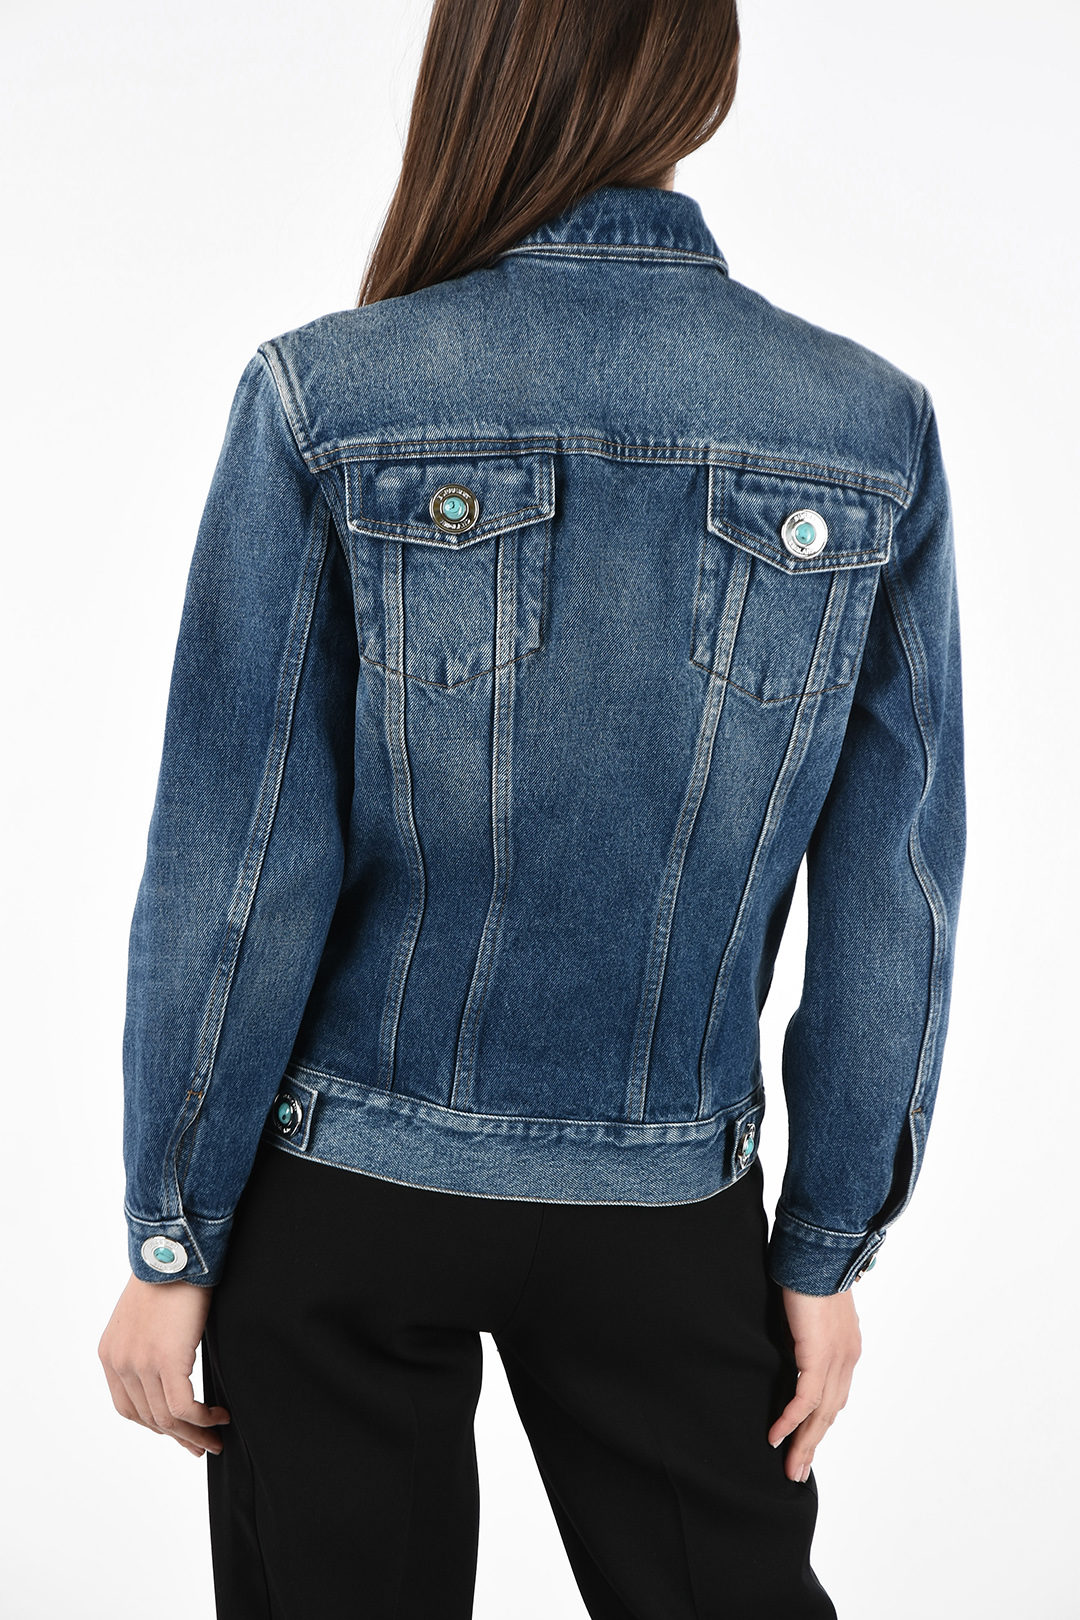 Burberry Denim Jacket with Jewel Buttons women - Glamood Outlet